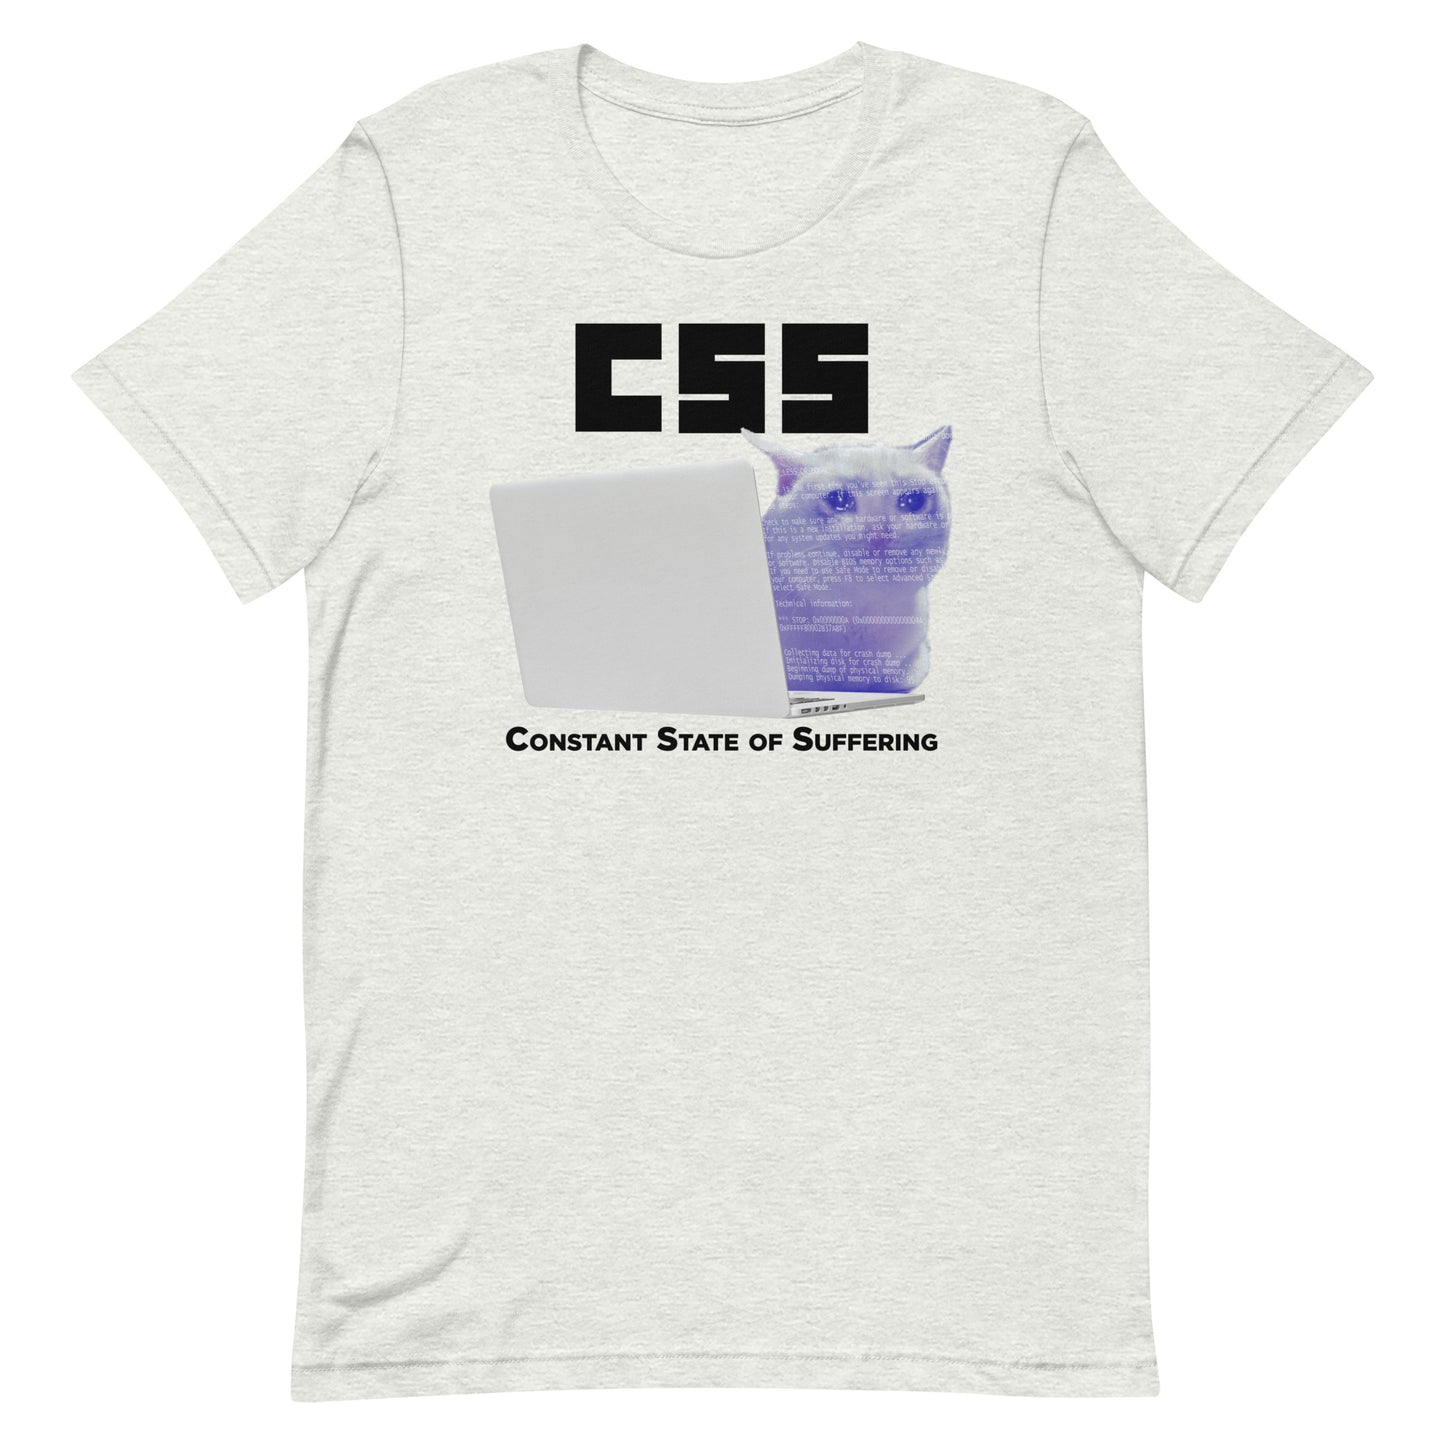 CSS (Constant State of Suffering) Unisex t-shirt